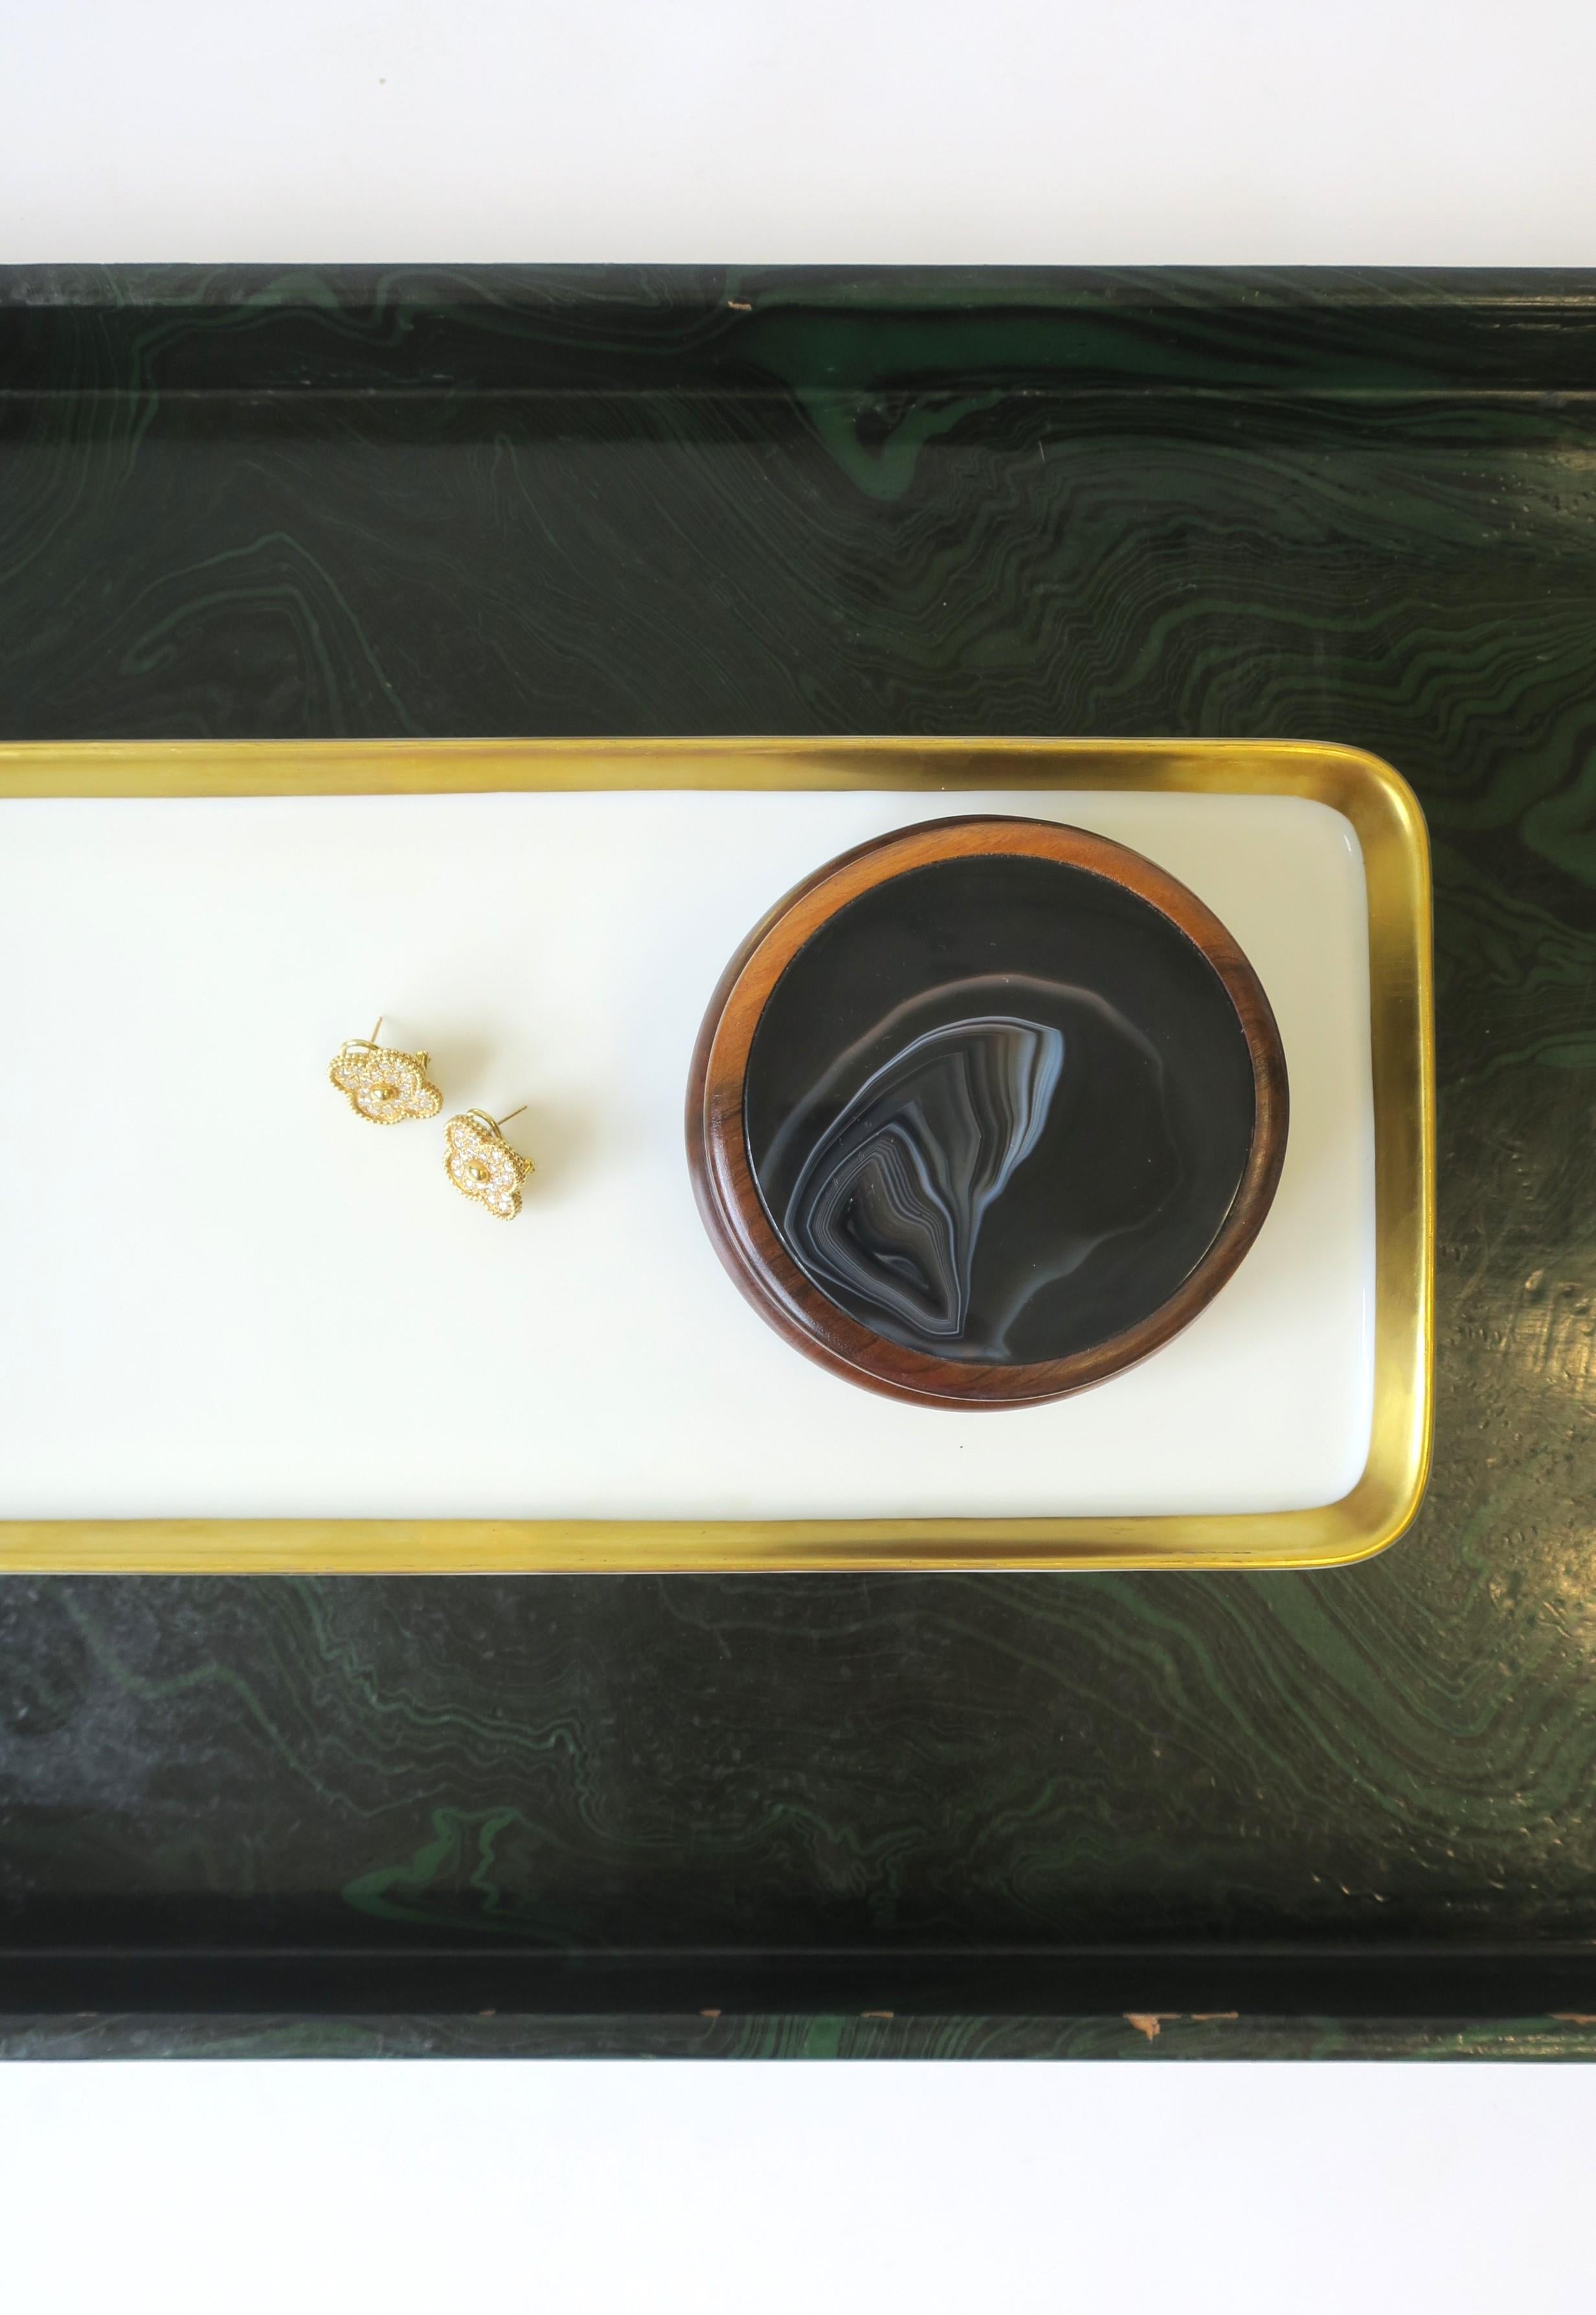 Brazilian Wood and Black Agate Onyx Round Box, Brazil 1980s For Sale 2